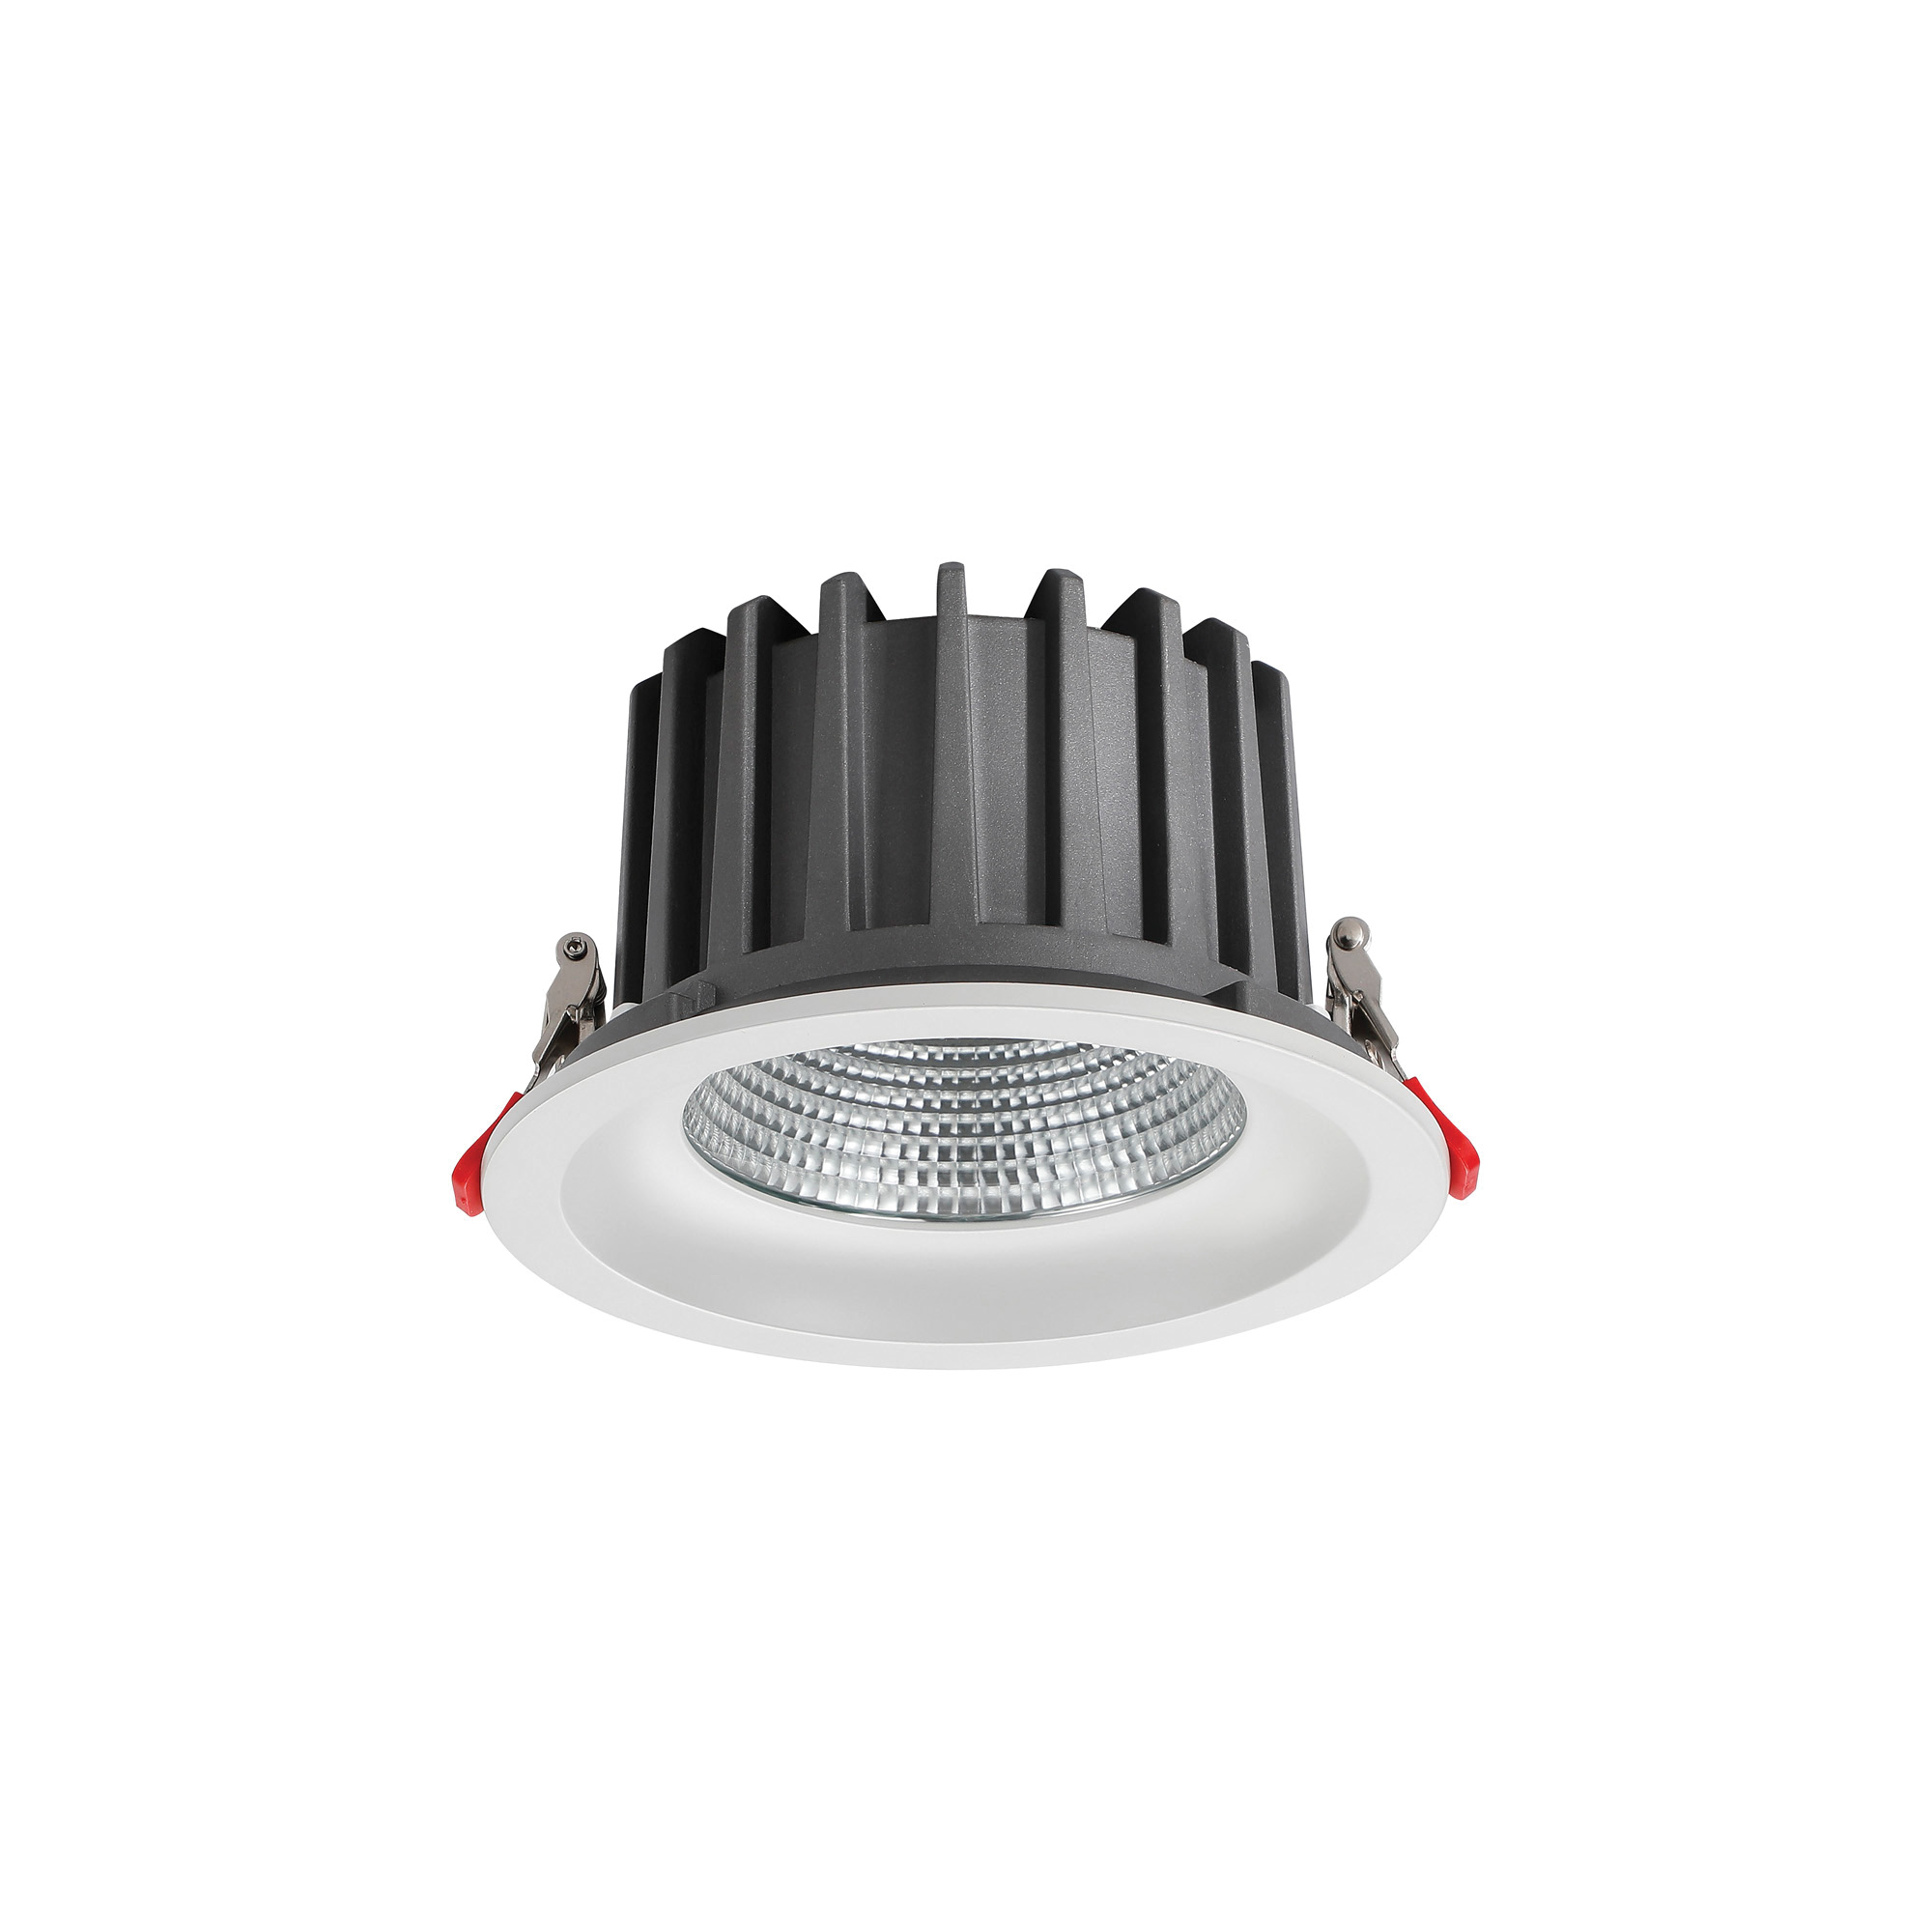 DL200060  Bionic 24; 24W; 700mA; White Deep Round Recessed Downlight; 2040lm ;Cut Out 155mm; 42° ; 5000K; IP44; DRIVER INC.; 5yrs Warranty.